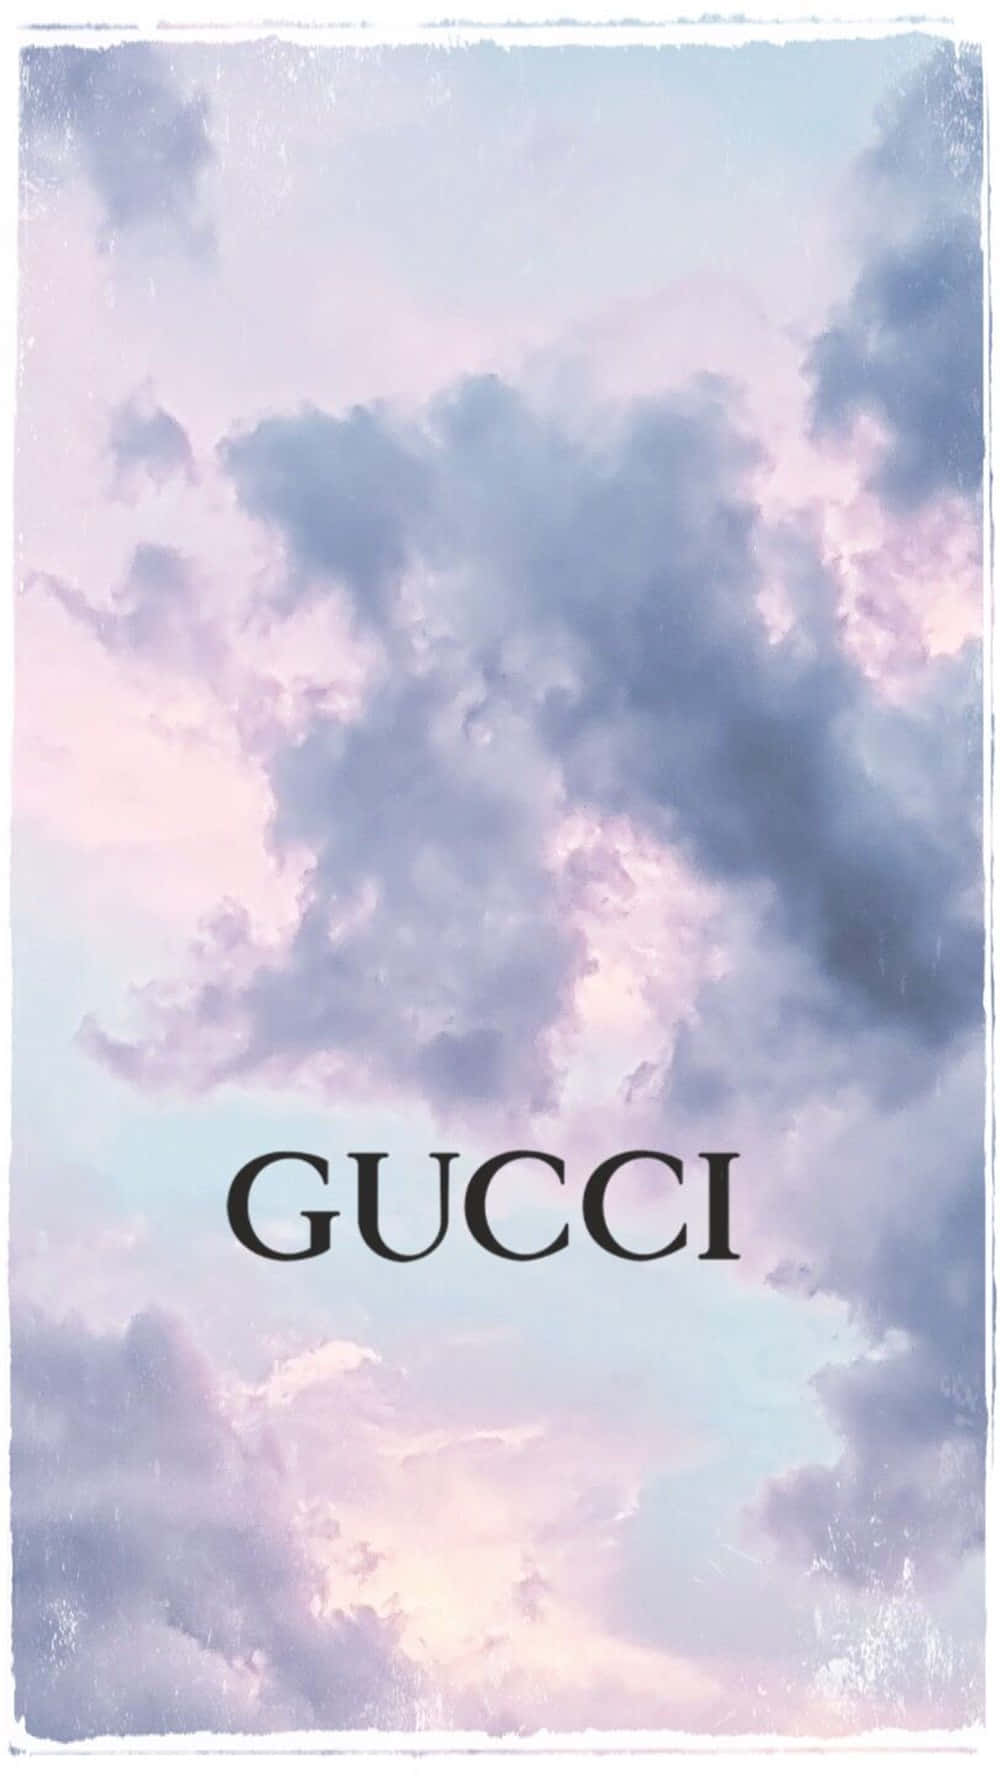 The Finest in Luxury. Own the Perfect Purple Gucci Accessory. Wallpaper